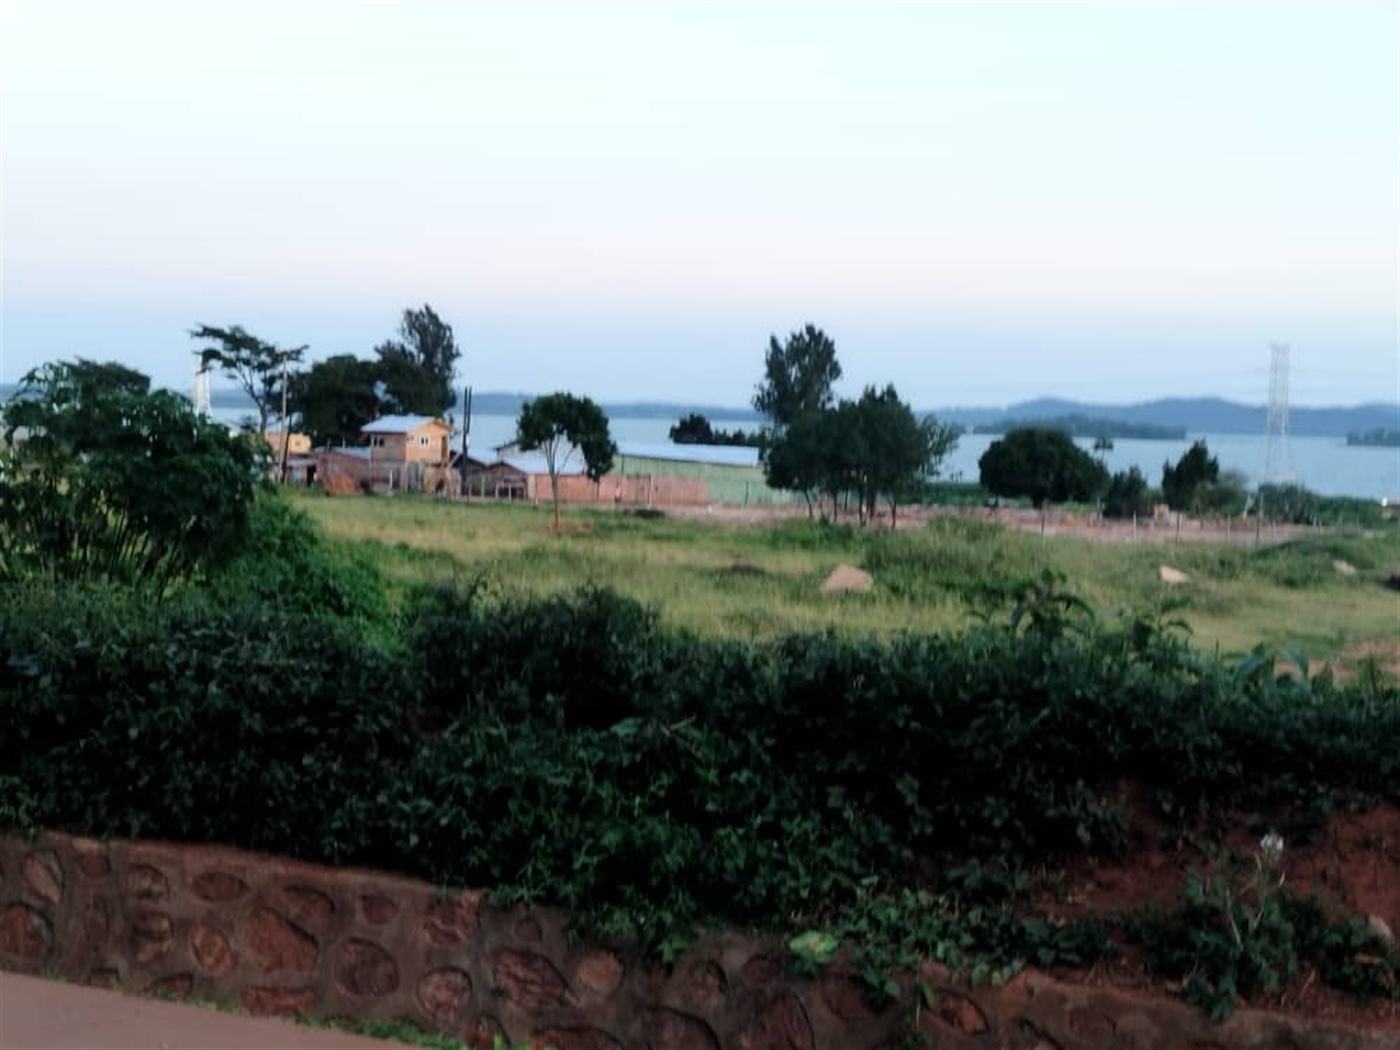 Commercial Land for sale in Luzira Kampala